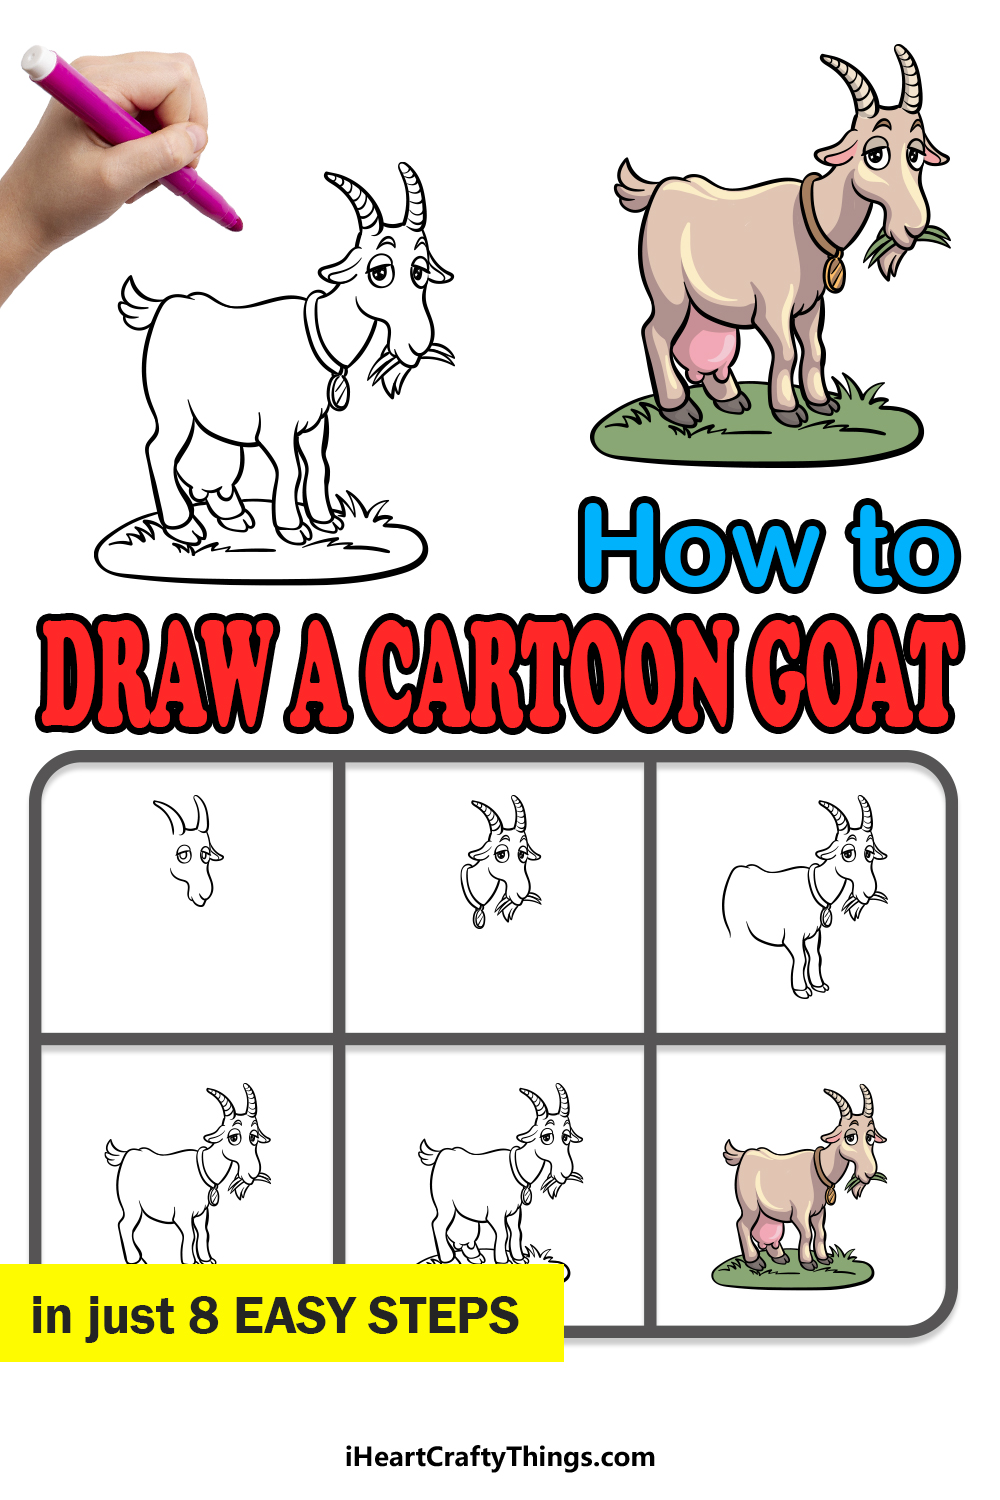 how to draw a cartoon goat in 8 easy steps